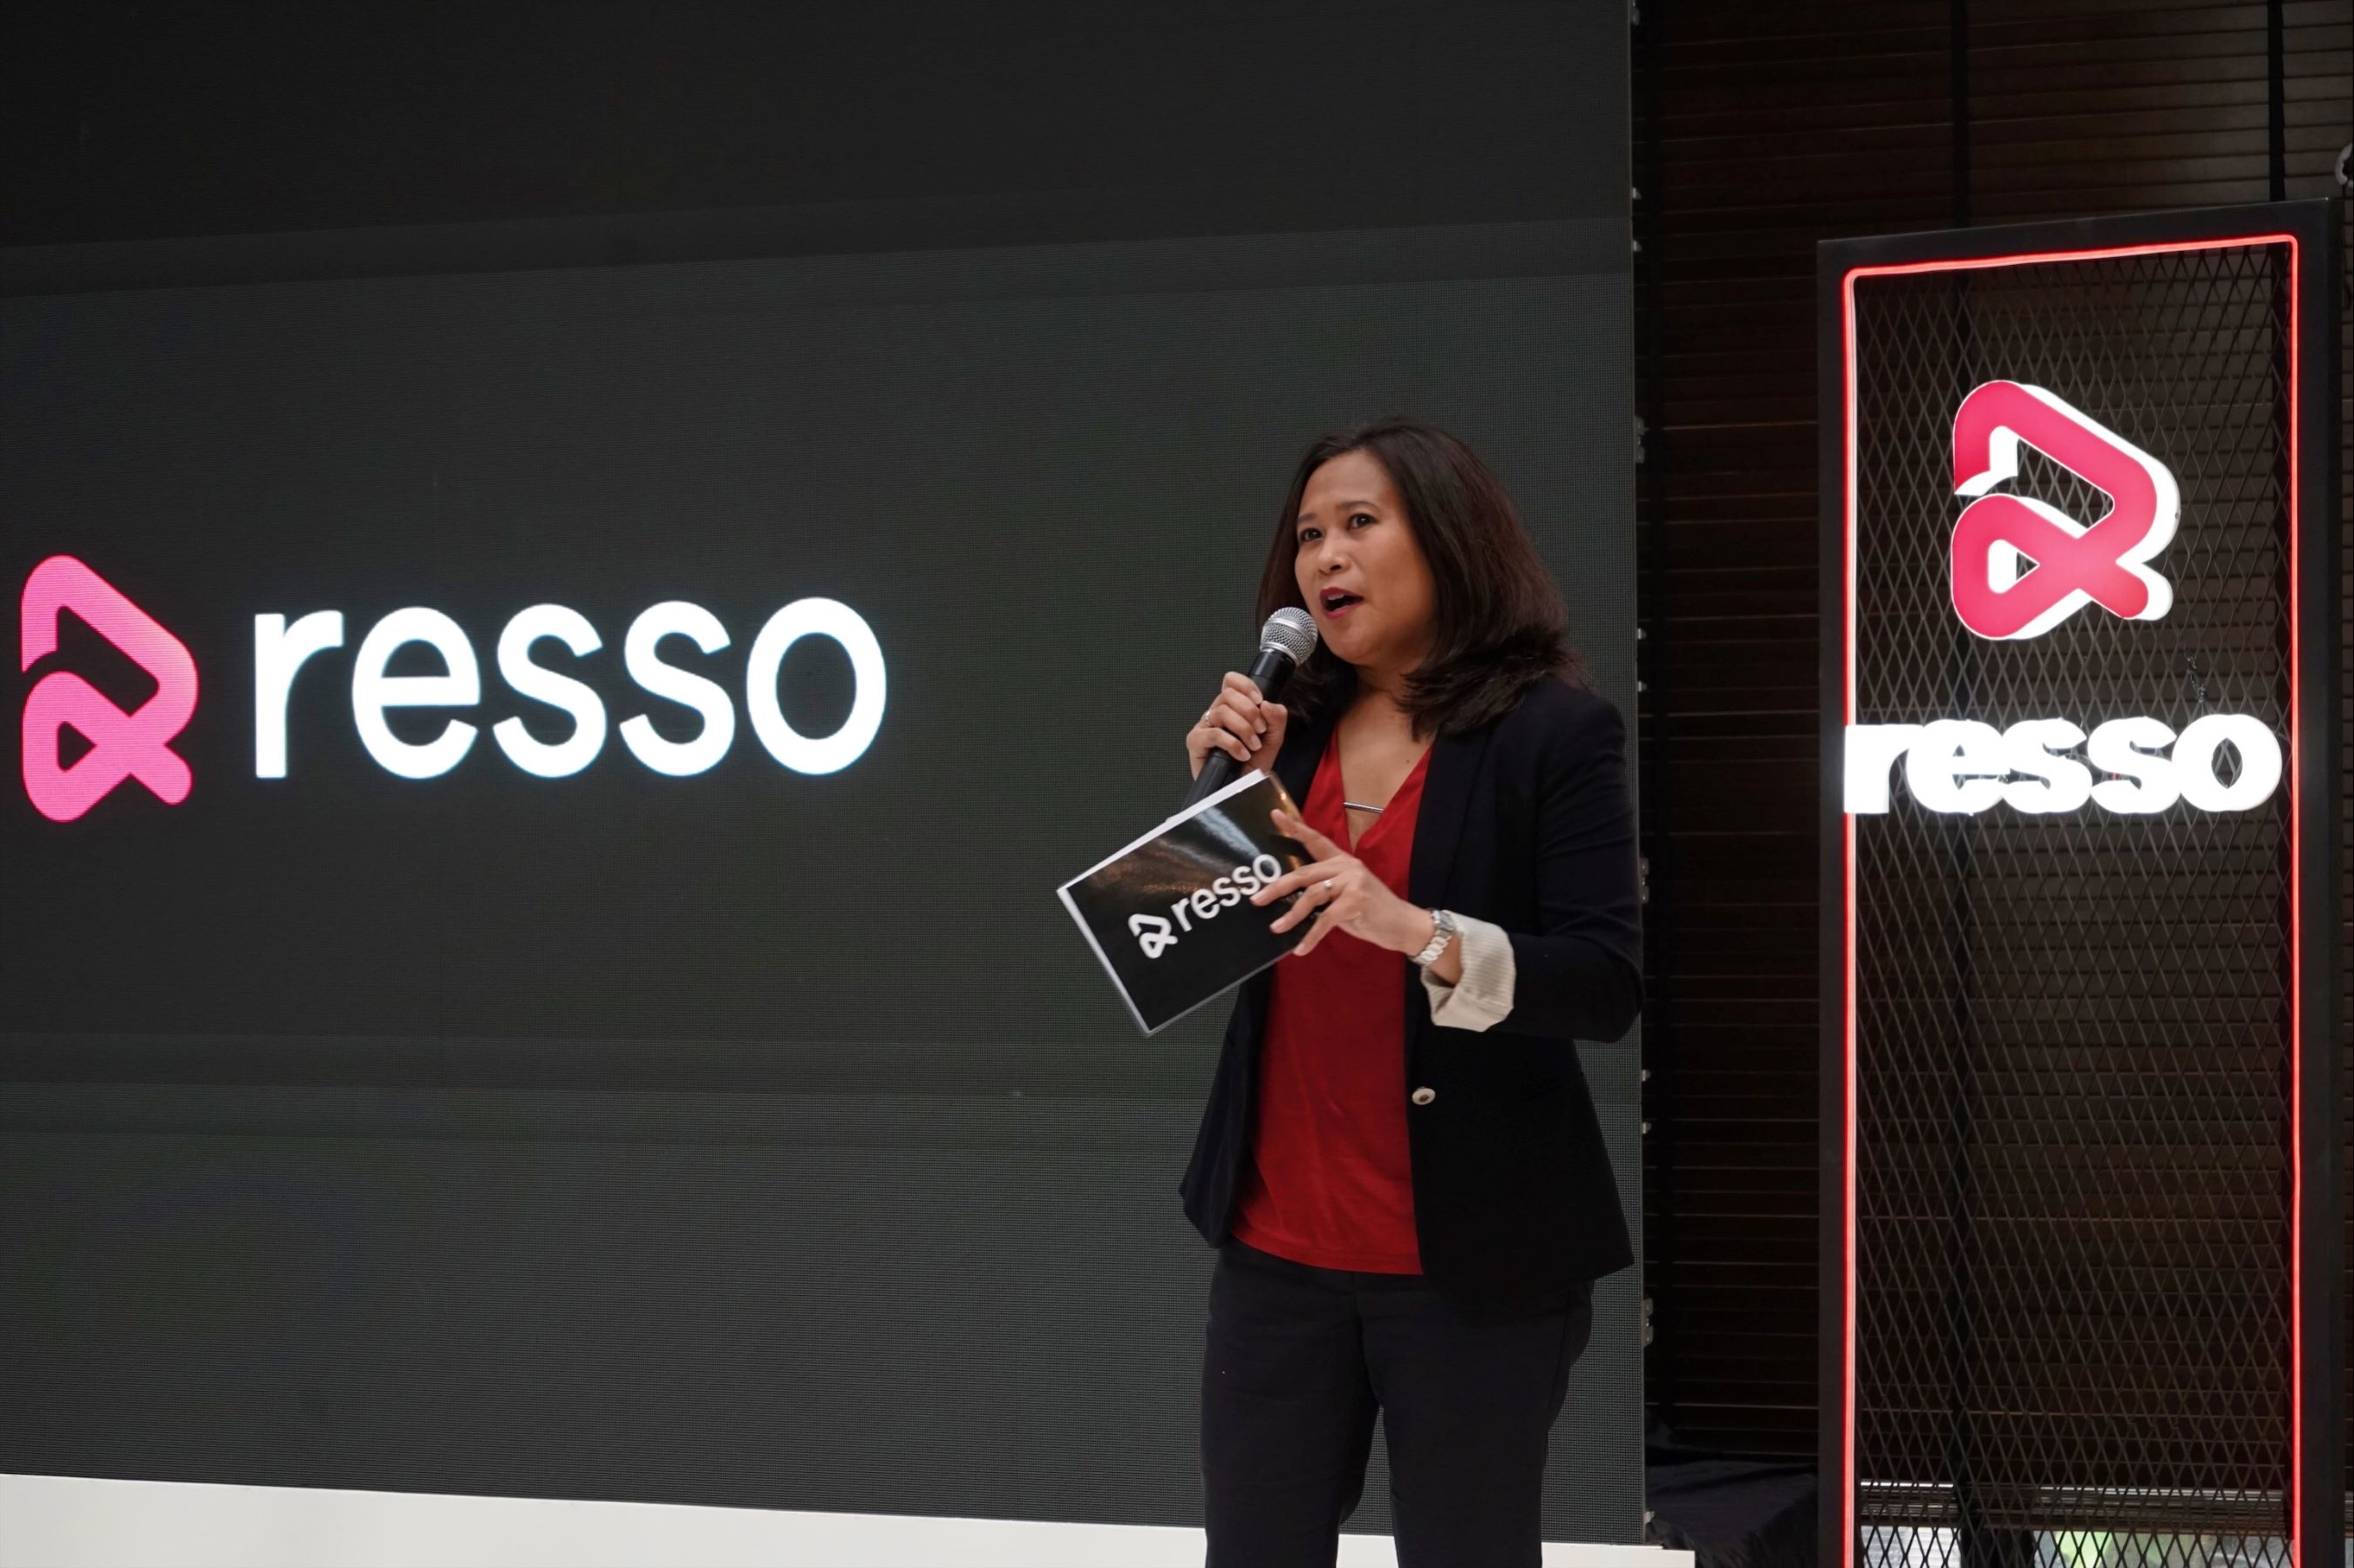 ByteDance’s music streaming app Resso has officially launched in Indonesia